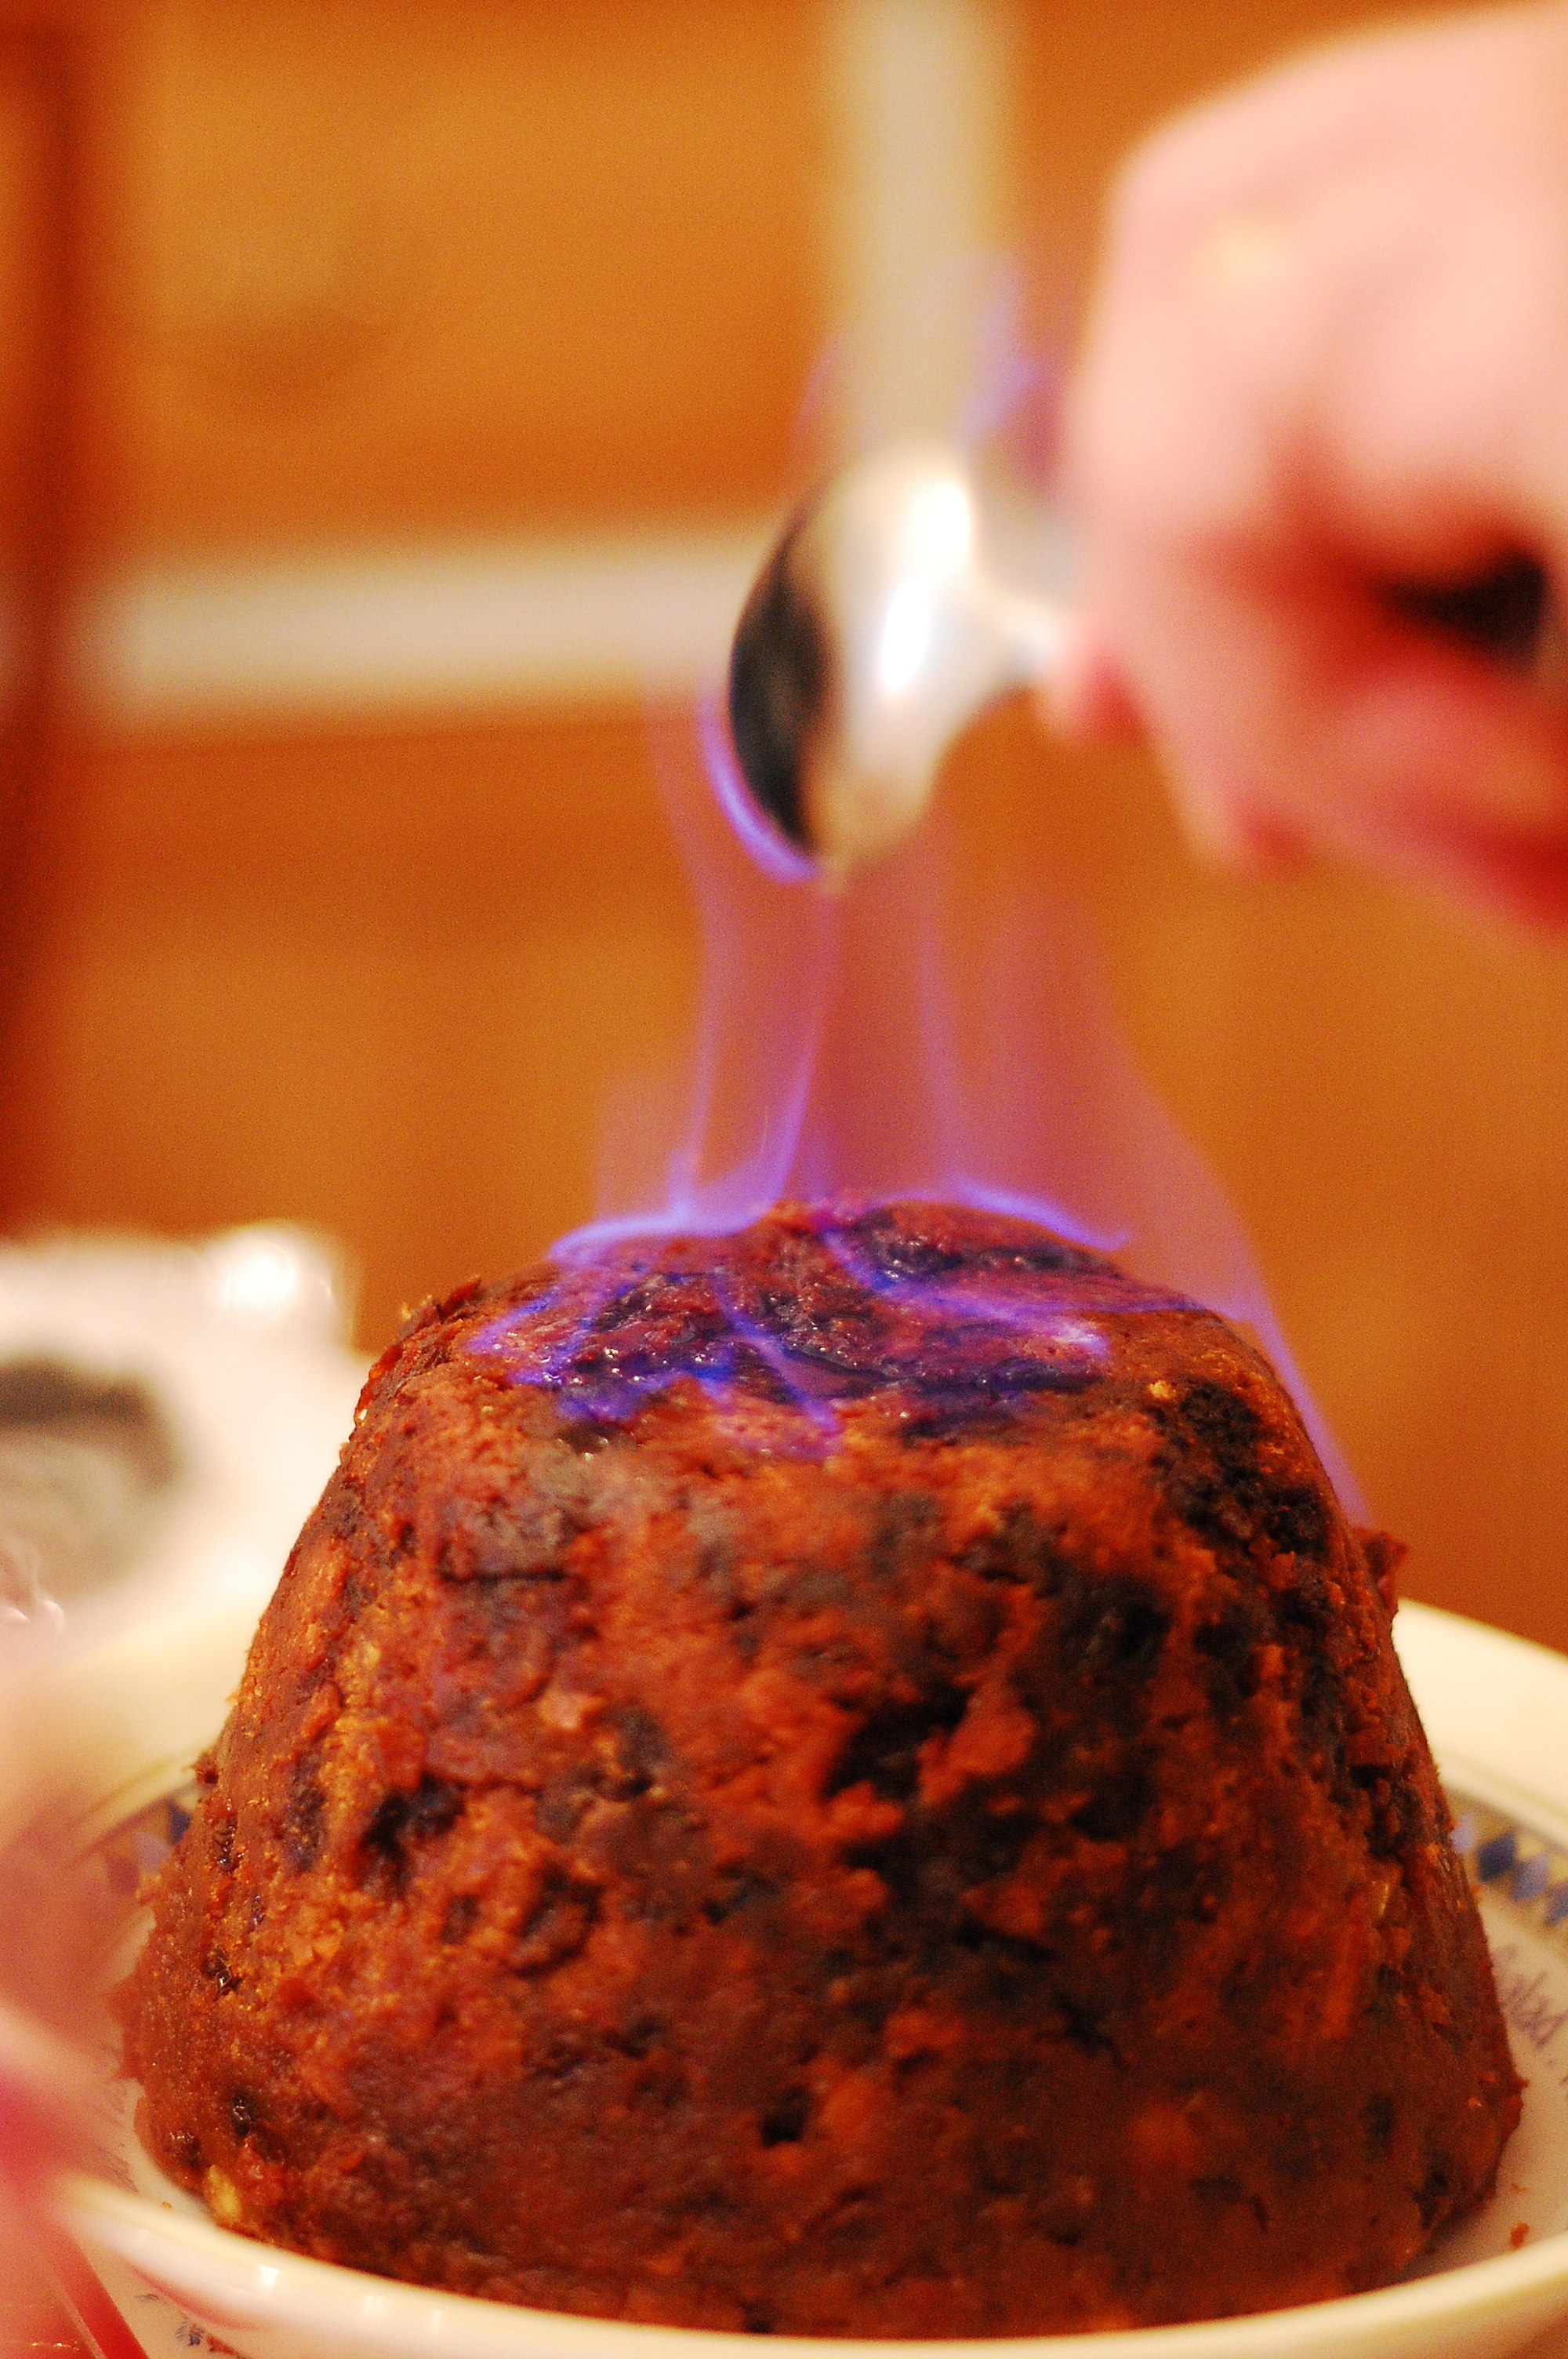 http://upload.wikimedia.org/wikipedia/commons/thumb/4/4c/Christmas_Pudding_with_Flaming_Rum.jpg/2000px-Christmas_Pudding_with_Flaming_Rum.jpg